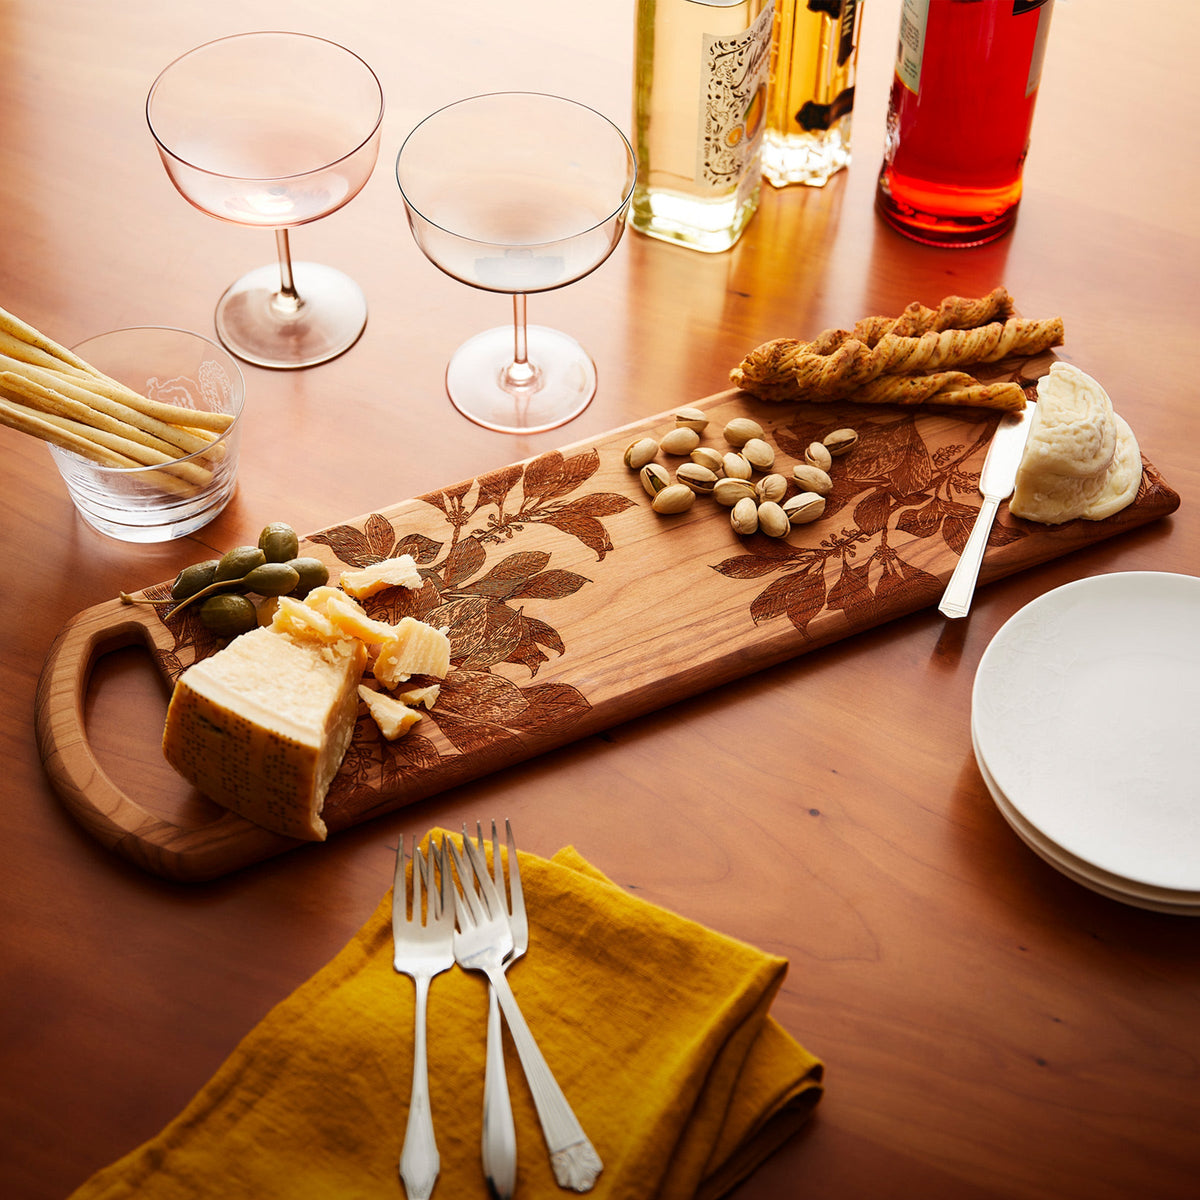 The Arbor Serving Board from Caskata makes a lovely serving pieces for evening snacks. Made in the USA from American Cherry wood.